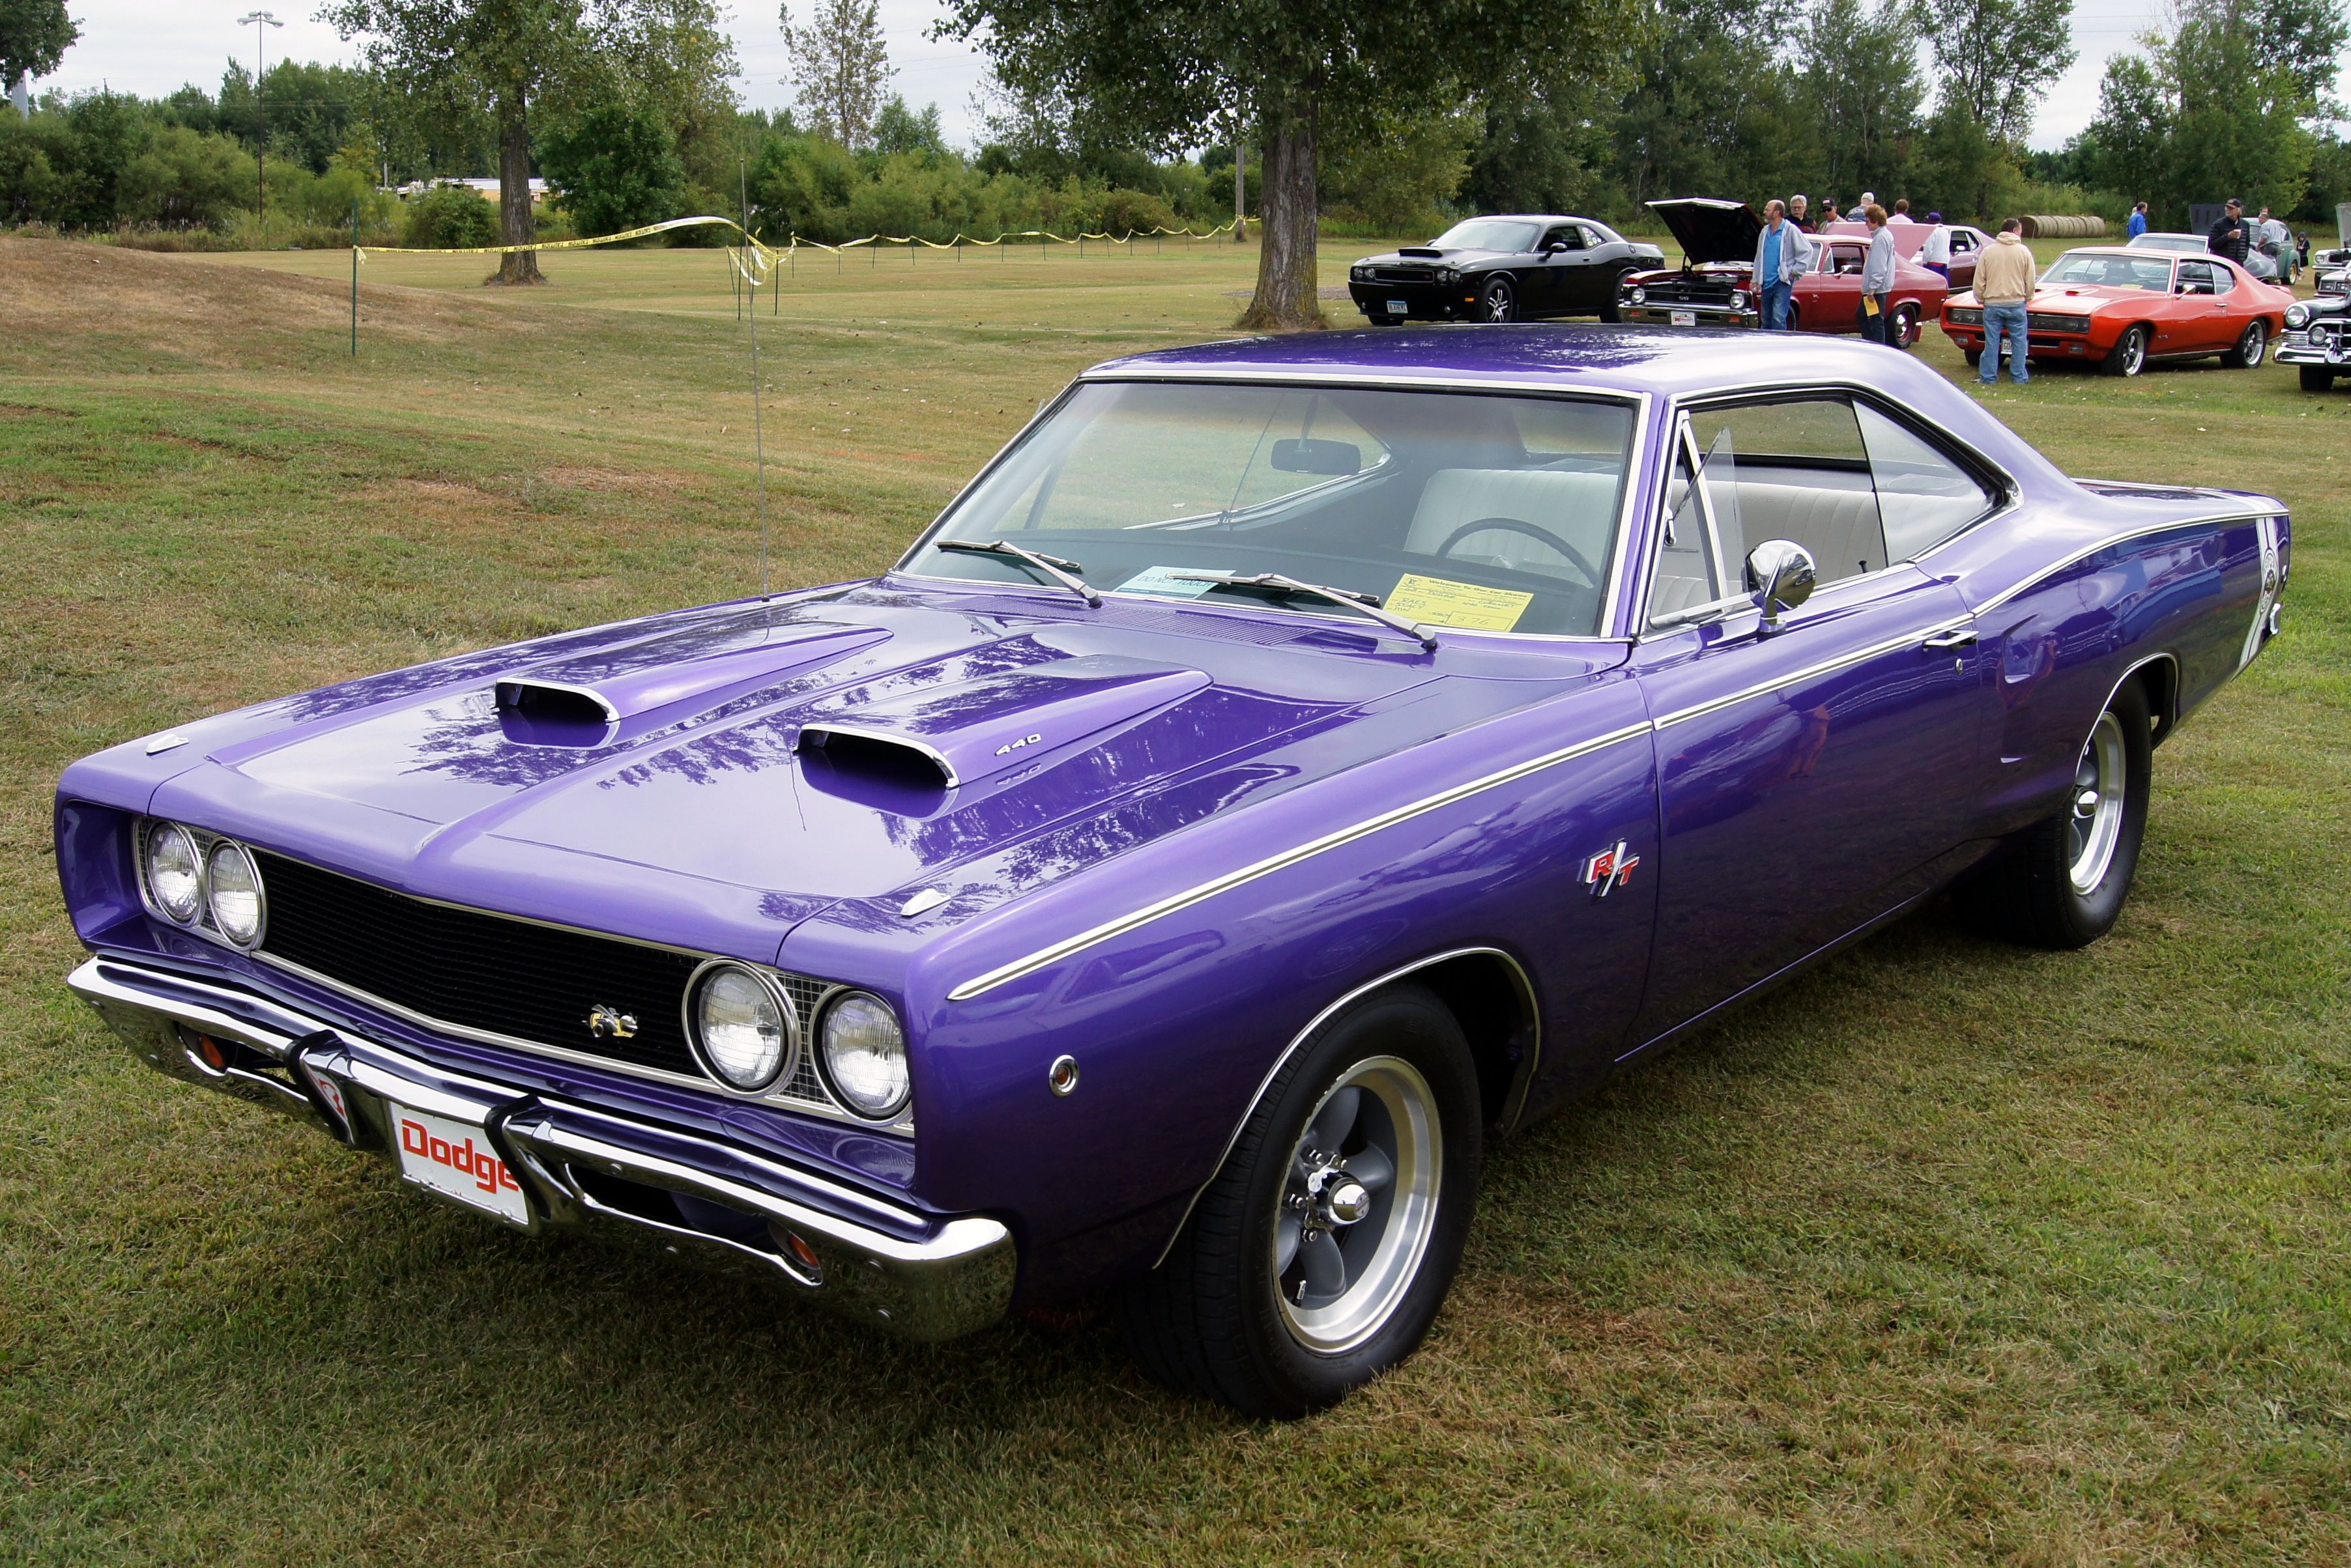 A parked 1968 Dodge Coronet R/T